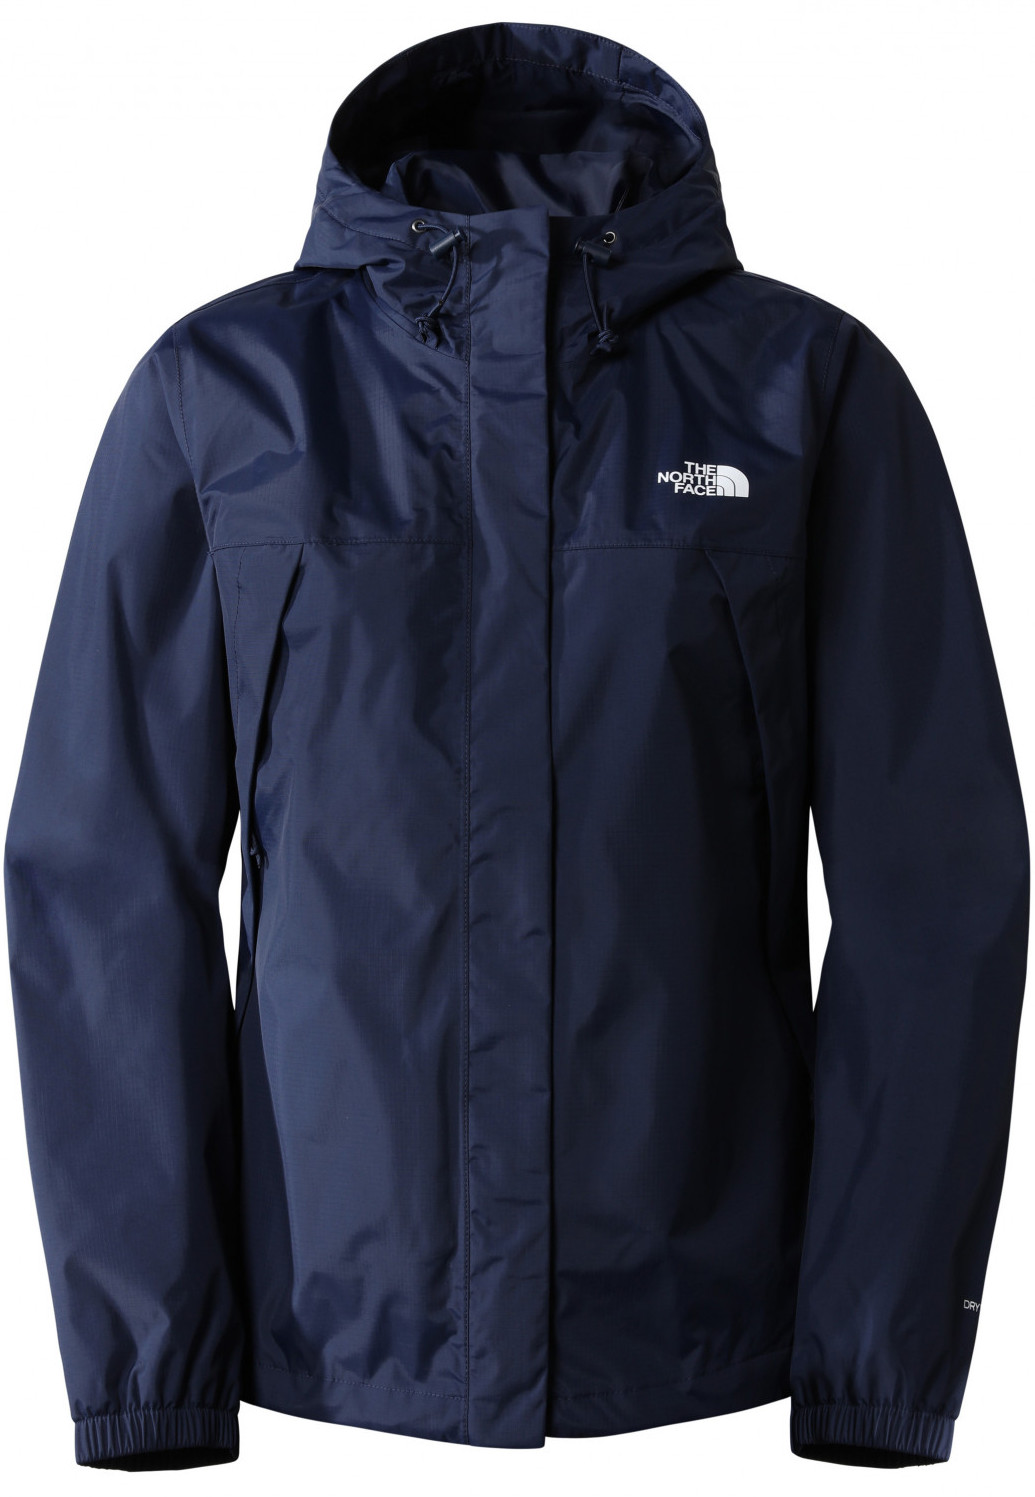 Unlock Wilderness' choice in the Helly Hansen Vs North Face comparison, the Antora Jacket by North Face